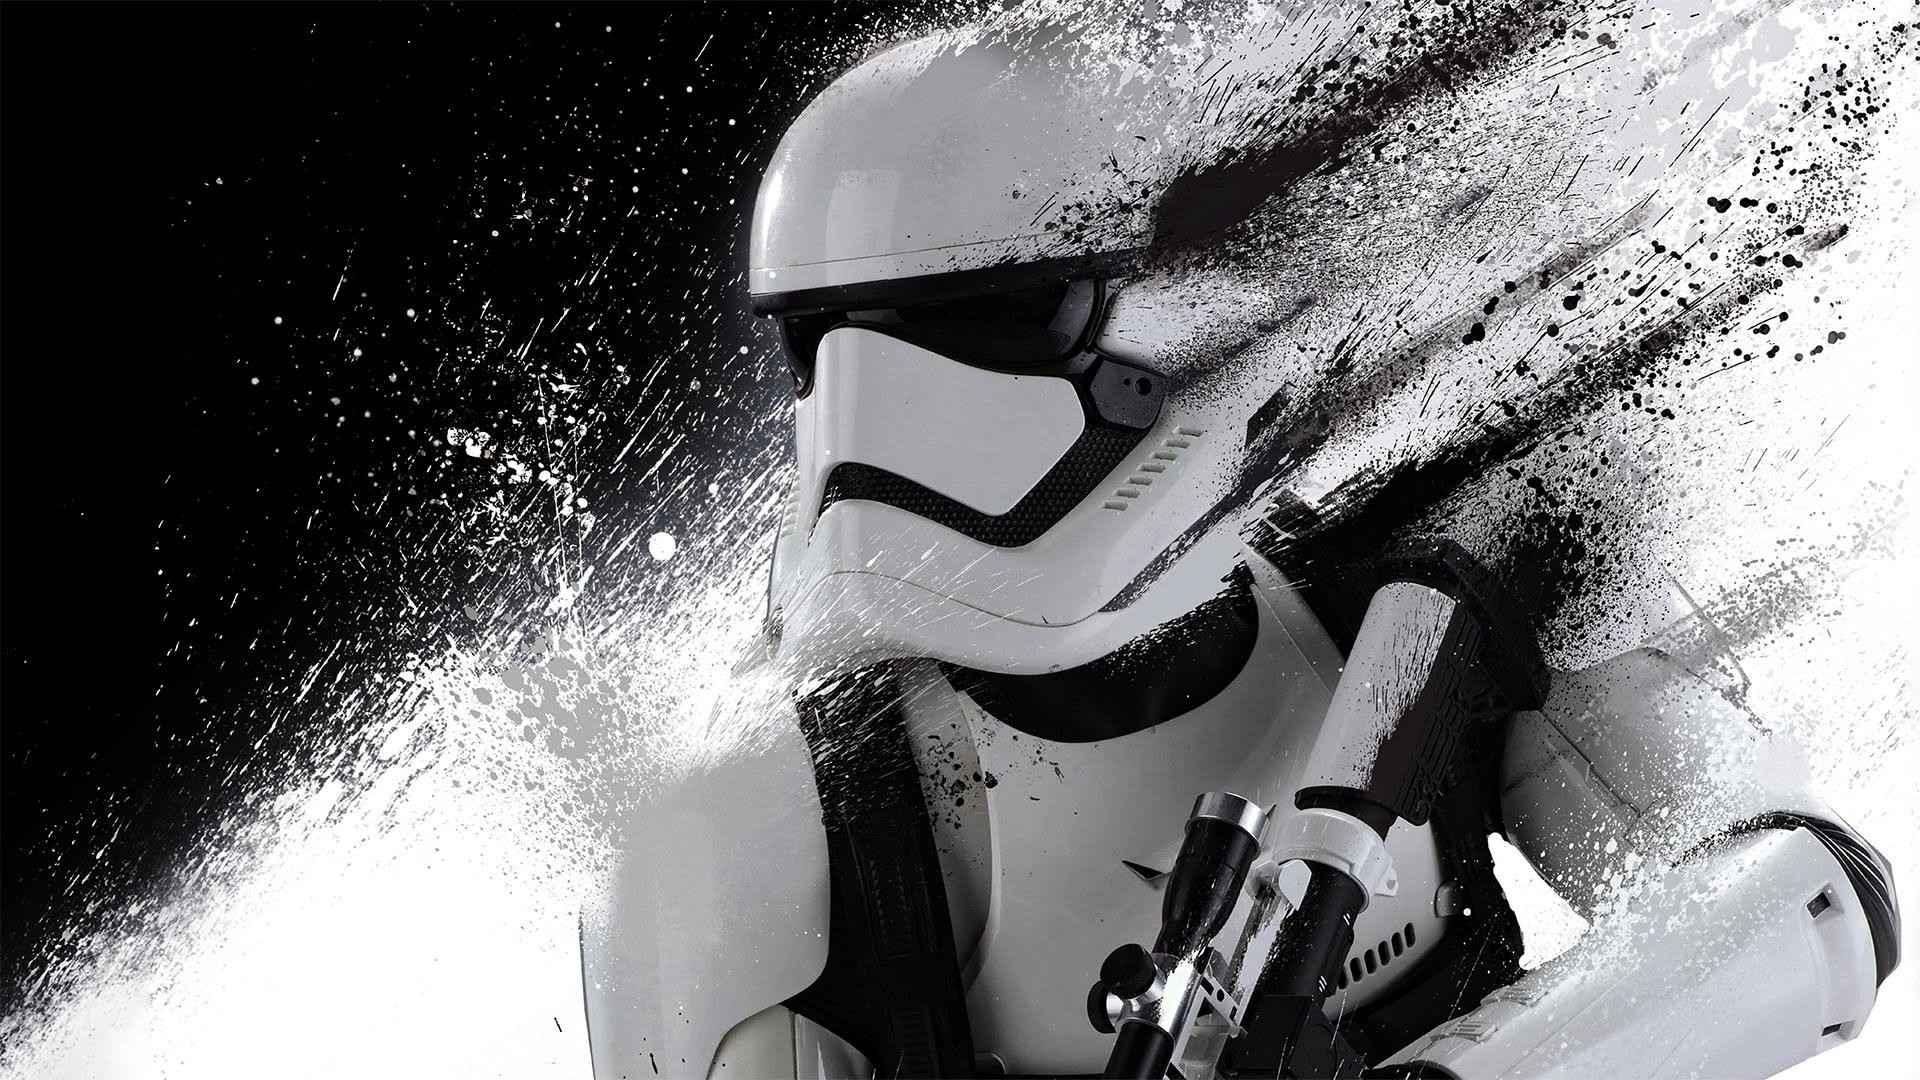 1920x1080 Title : awesome star wars wallpaper! – youtube. Dimension : 1920 x 1080.  File Type : JPG/JPEG